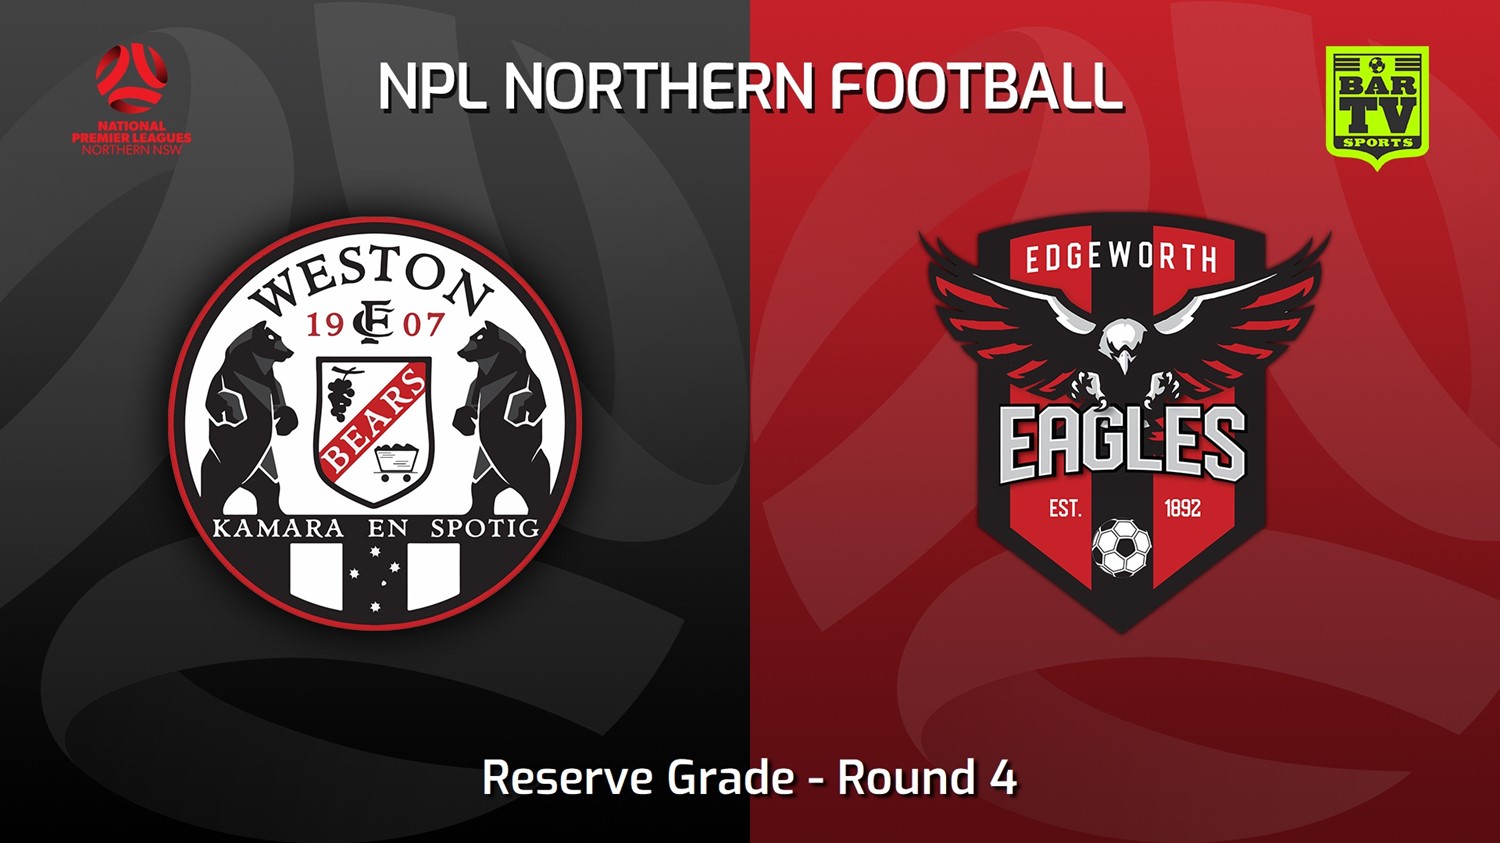 220731-NNSW NPLM Res Round 4 - Weston Workers FC Res v Edgeworth Eagles Res Minigame Slate Image